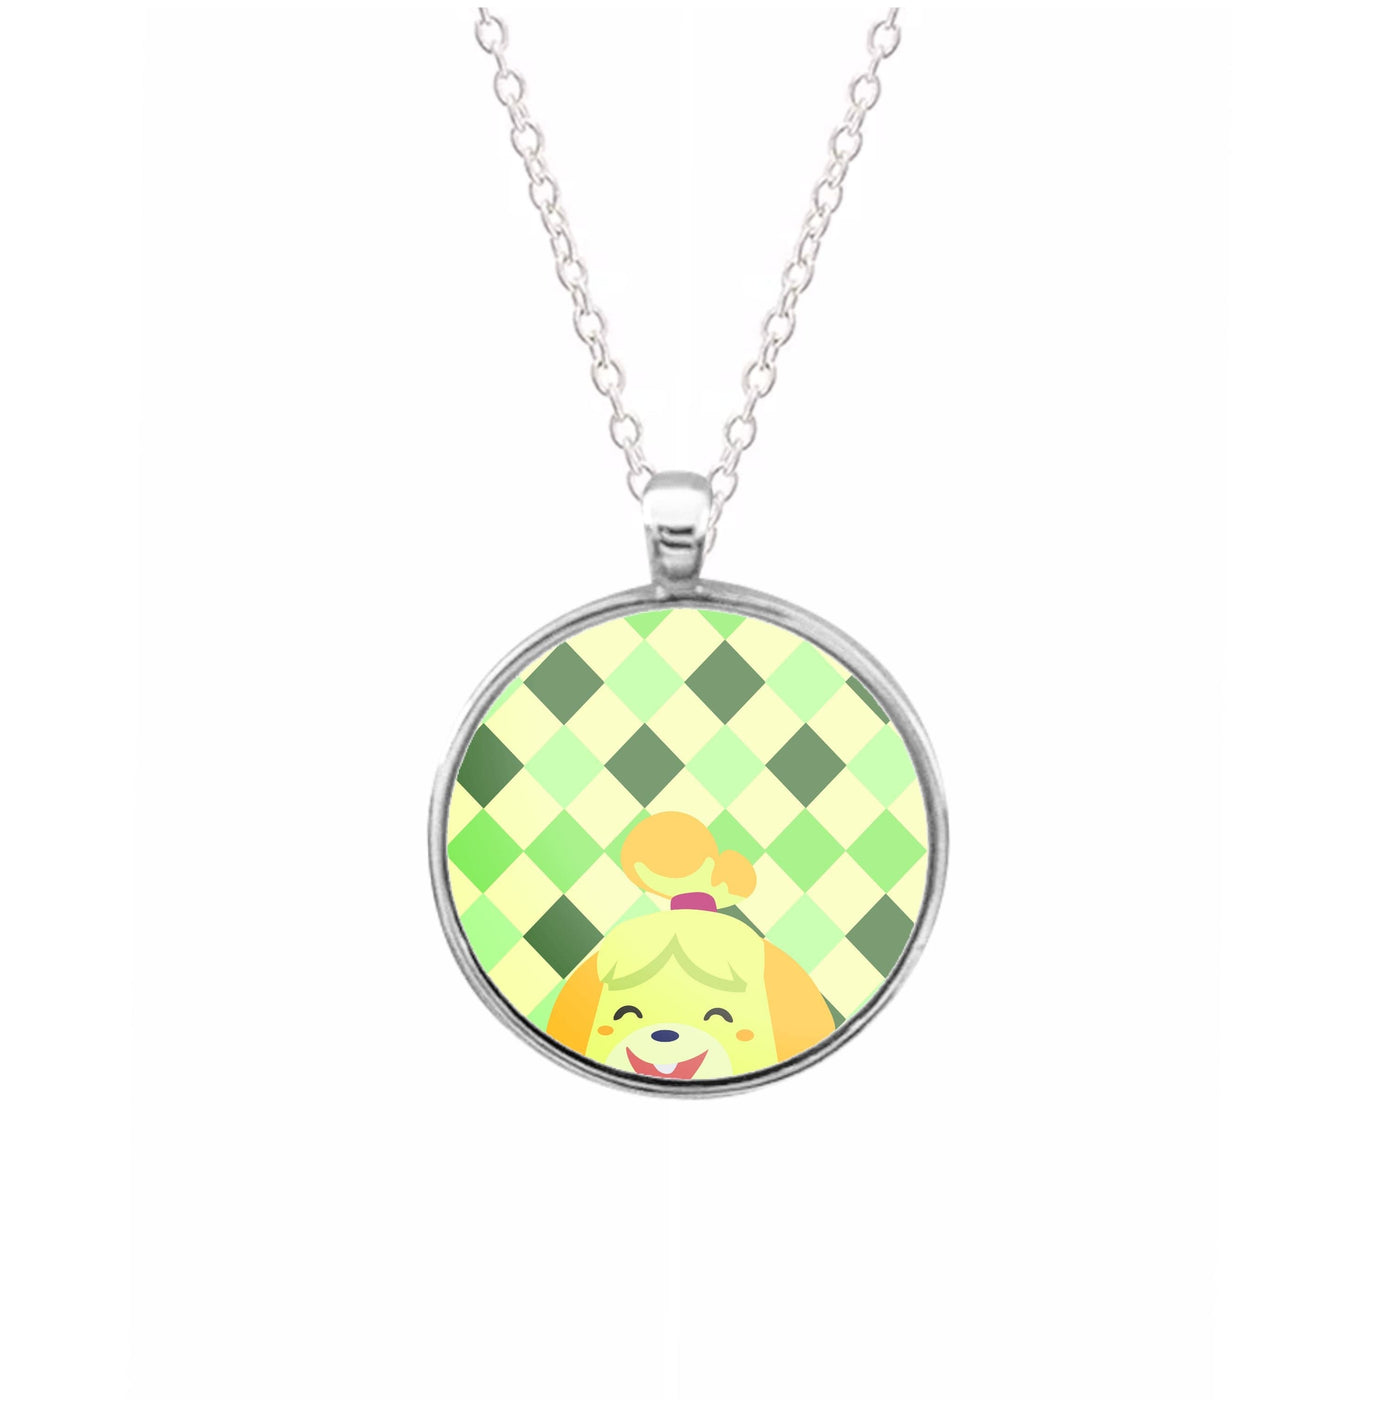 Isabelle checkers - Animal Crossing Necklace